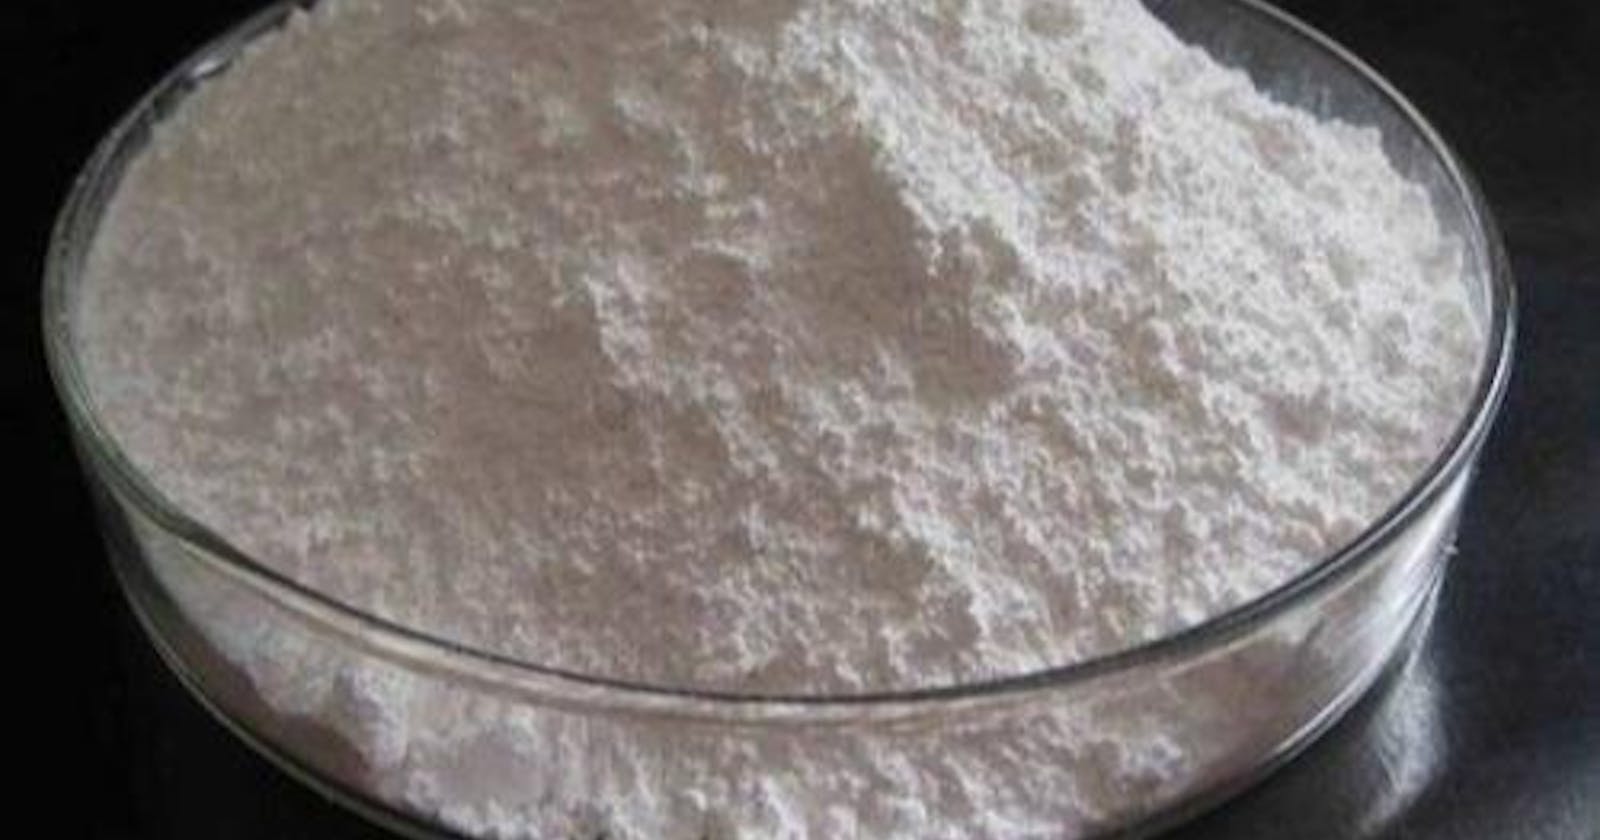 Europe Barium Carbonate Market 2027: Analysis, Size, Share, Trends and Outlook